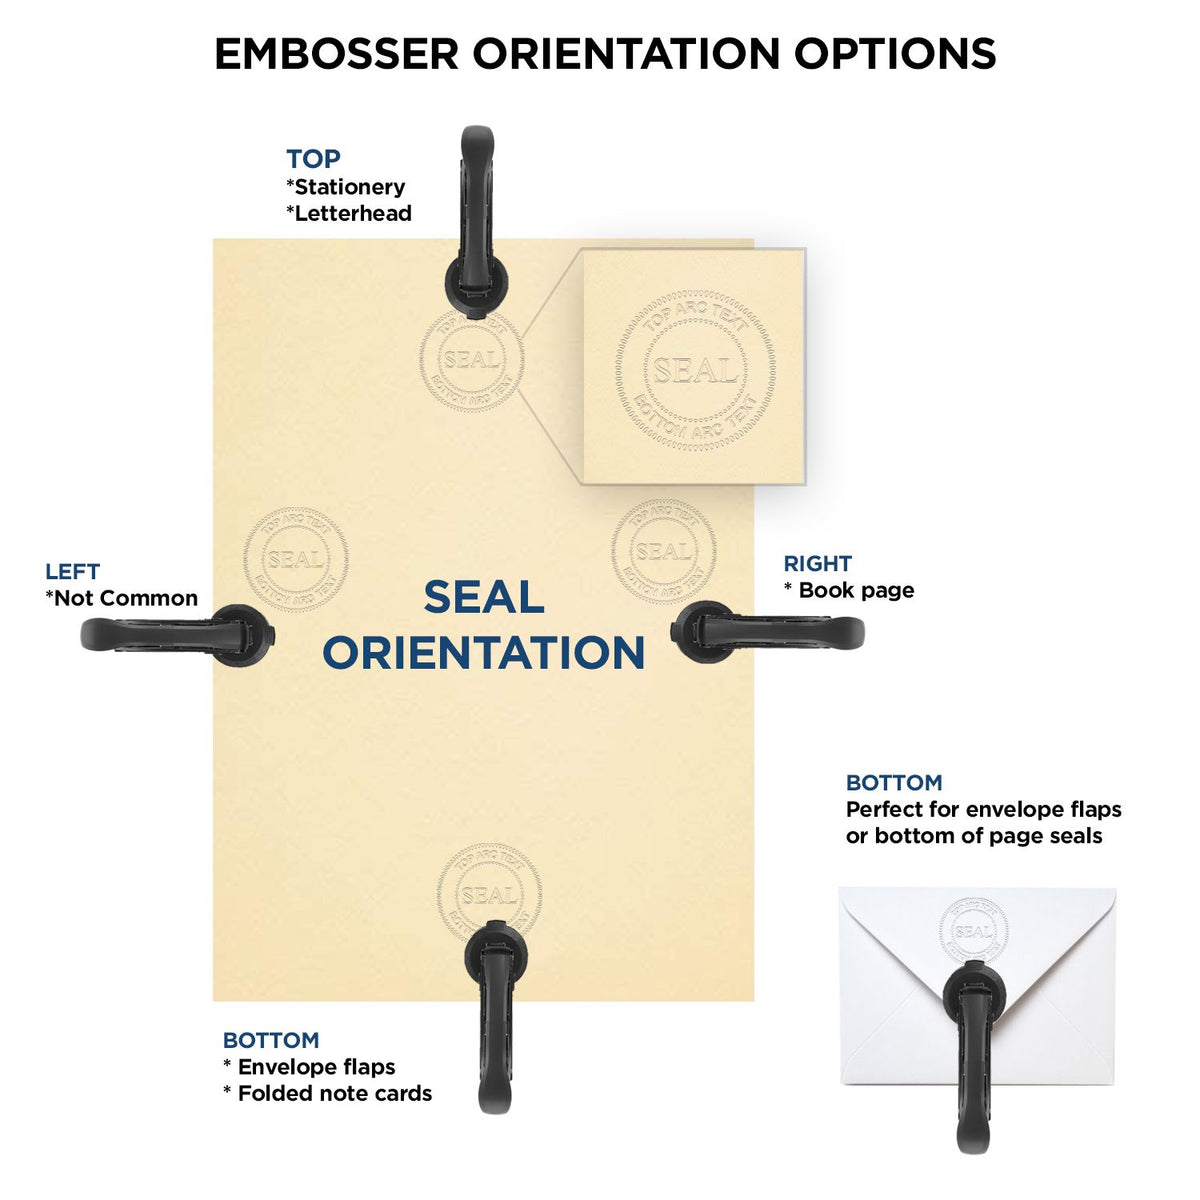 An infographic for the Extended Long Reach Montana Surveyor Embosser showing embosser orientation, this is showing examples of a top, bottom, right and left insert.